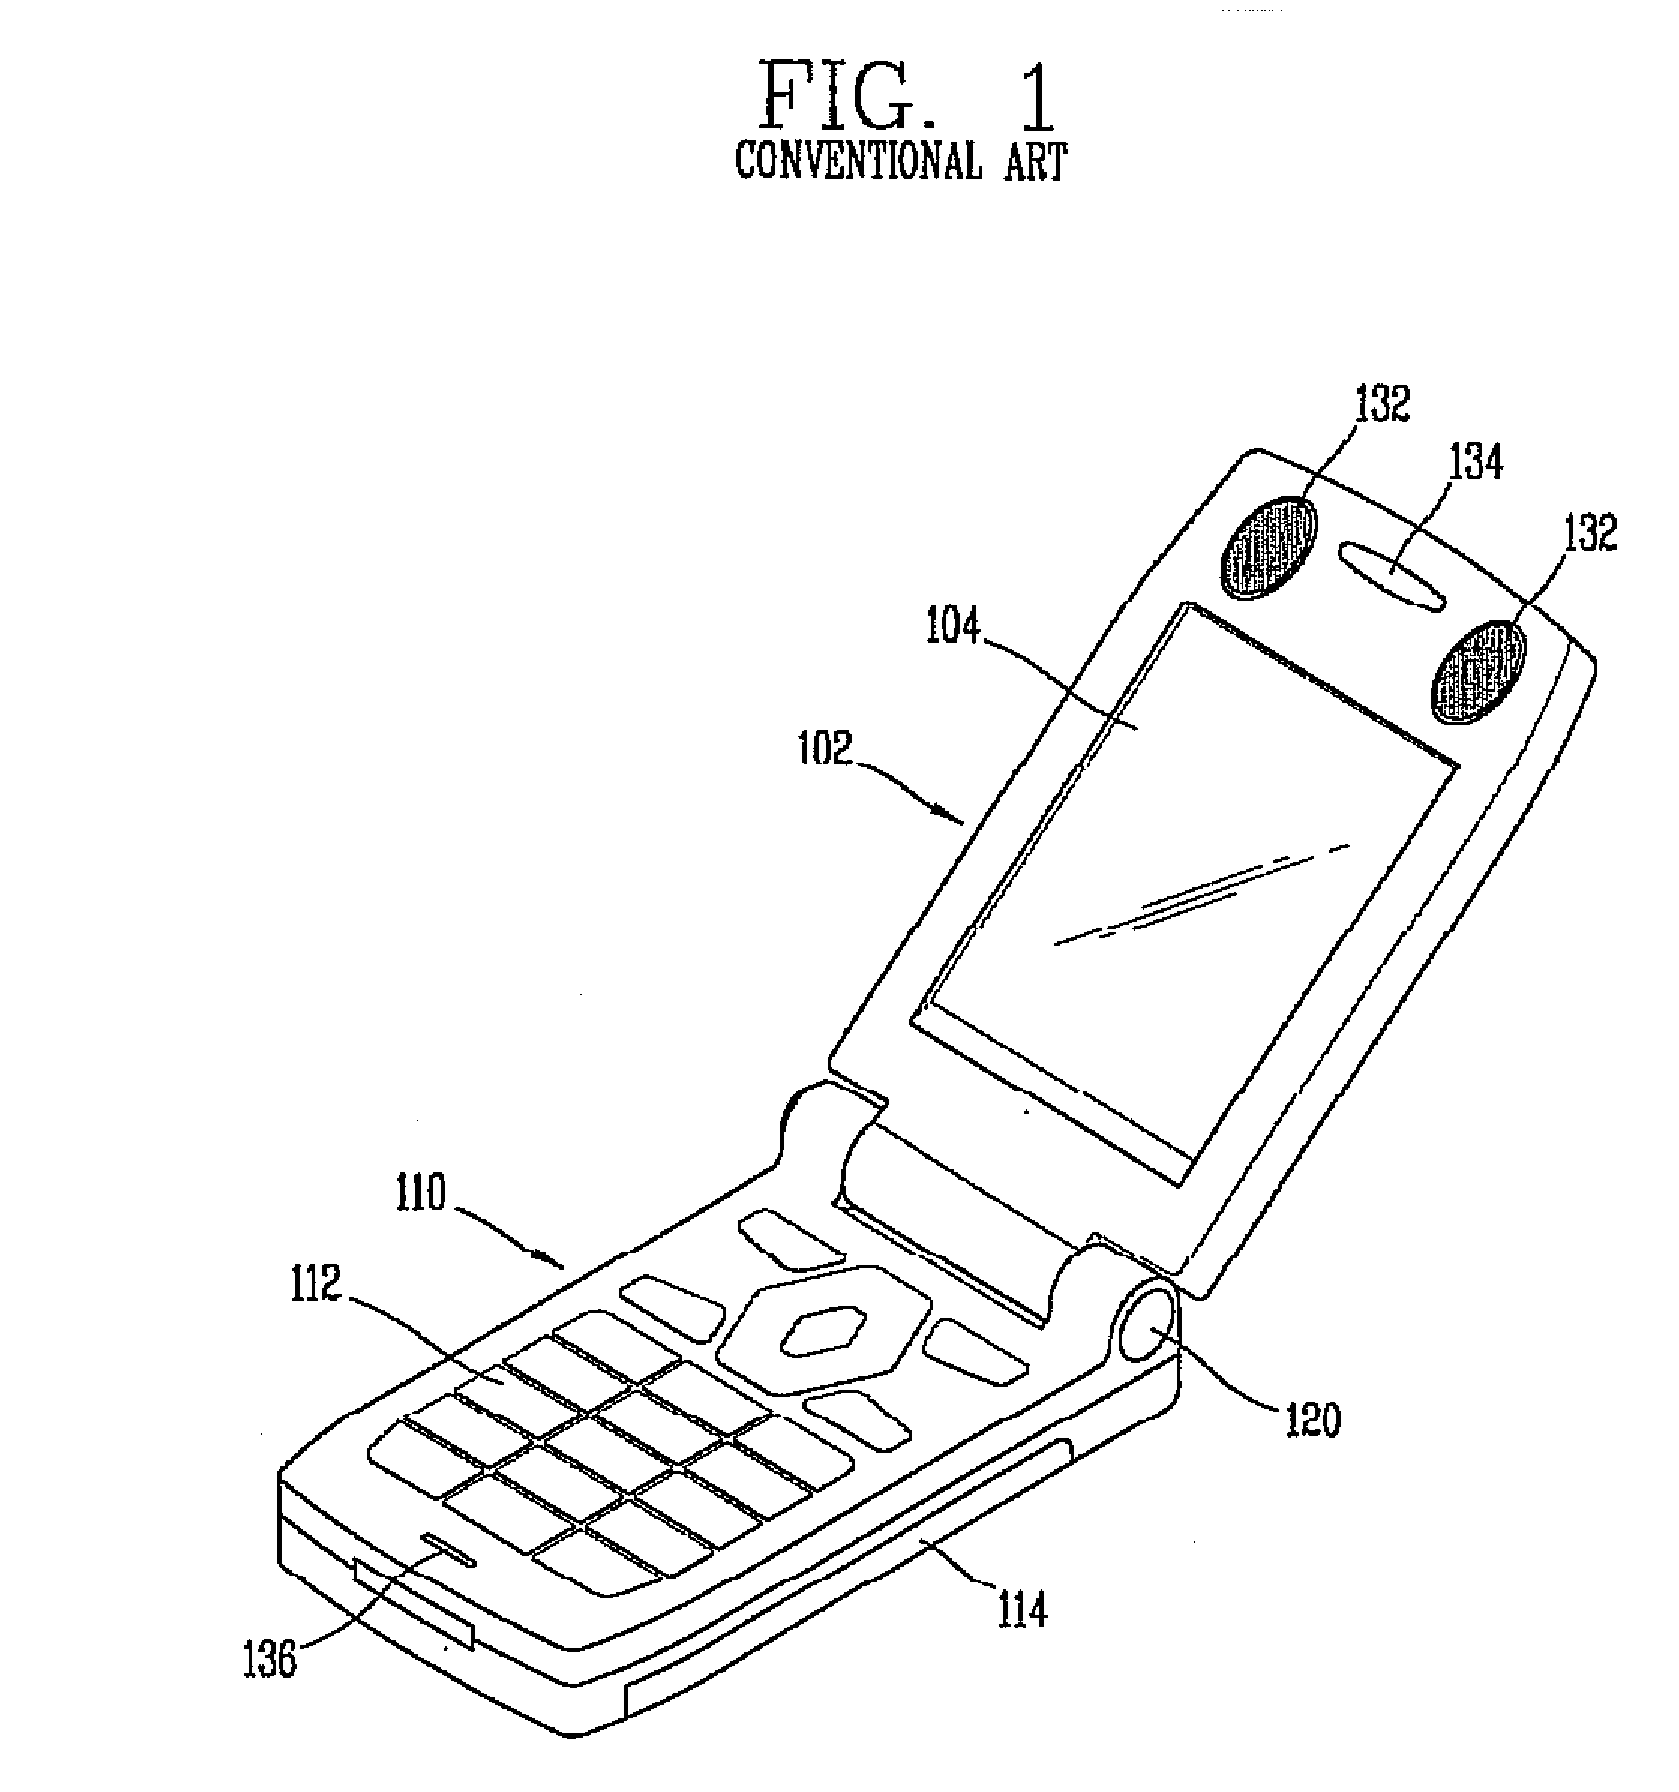 Mobile terminal with internal antenna structure having a sound resonance chamber